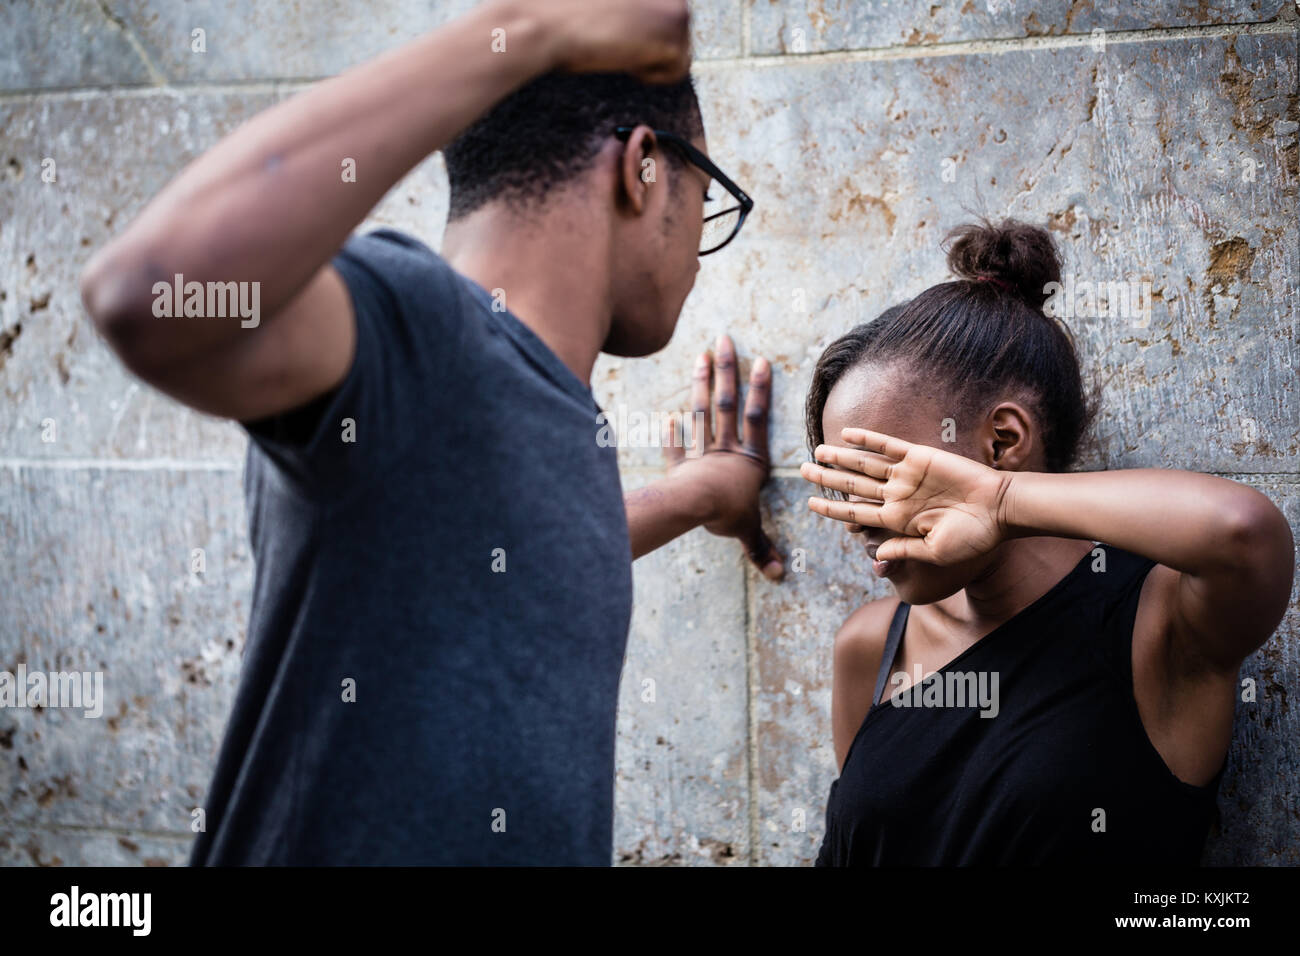 Violent young man threatening his girlfriend with his fist outdo Stock Photo